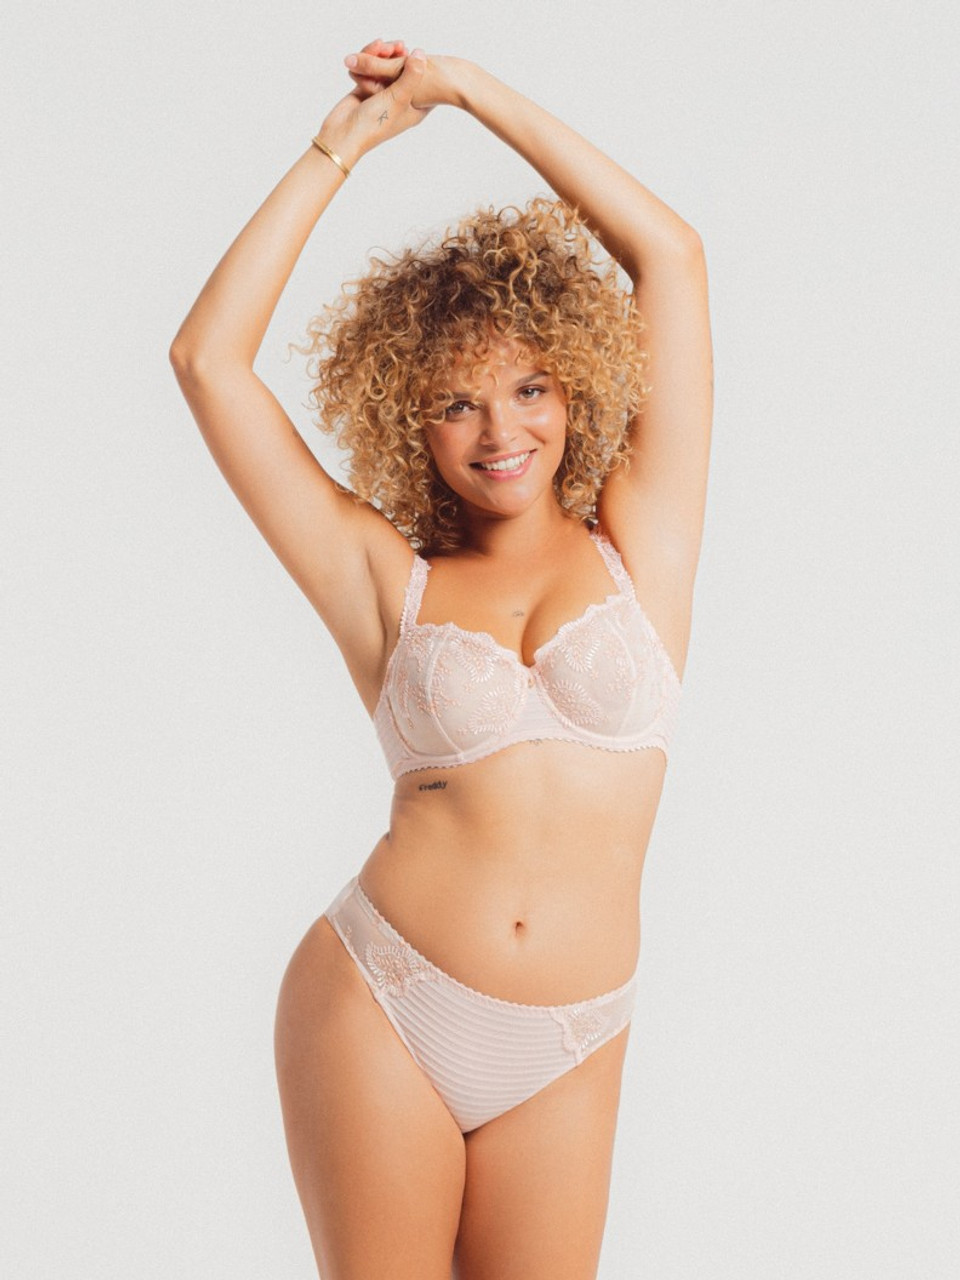 Louisa Bracq - Let us introduce Louisa Bracq's newest collection that just  expanded our ever-growing lingerie wishlist. Paco foulard bra in a divine  golden honey color inspired by the Unruly Child of